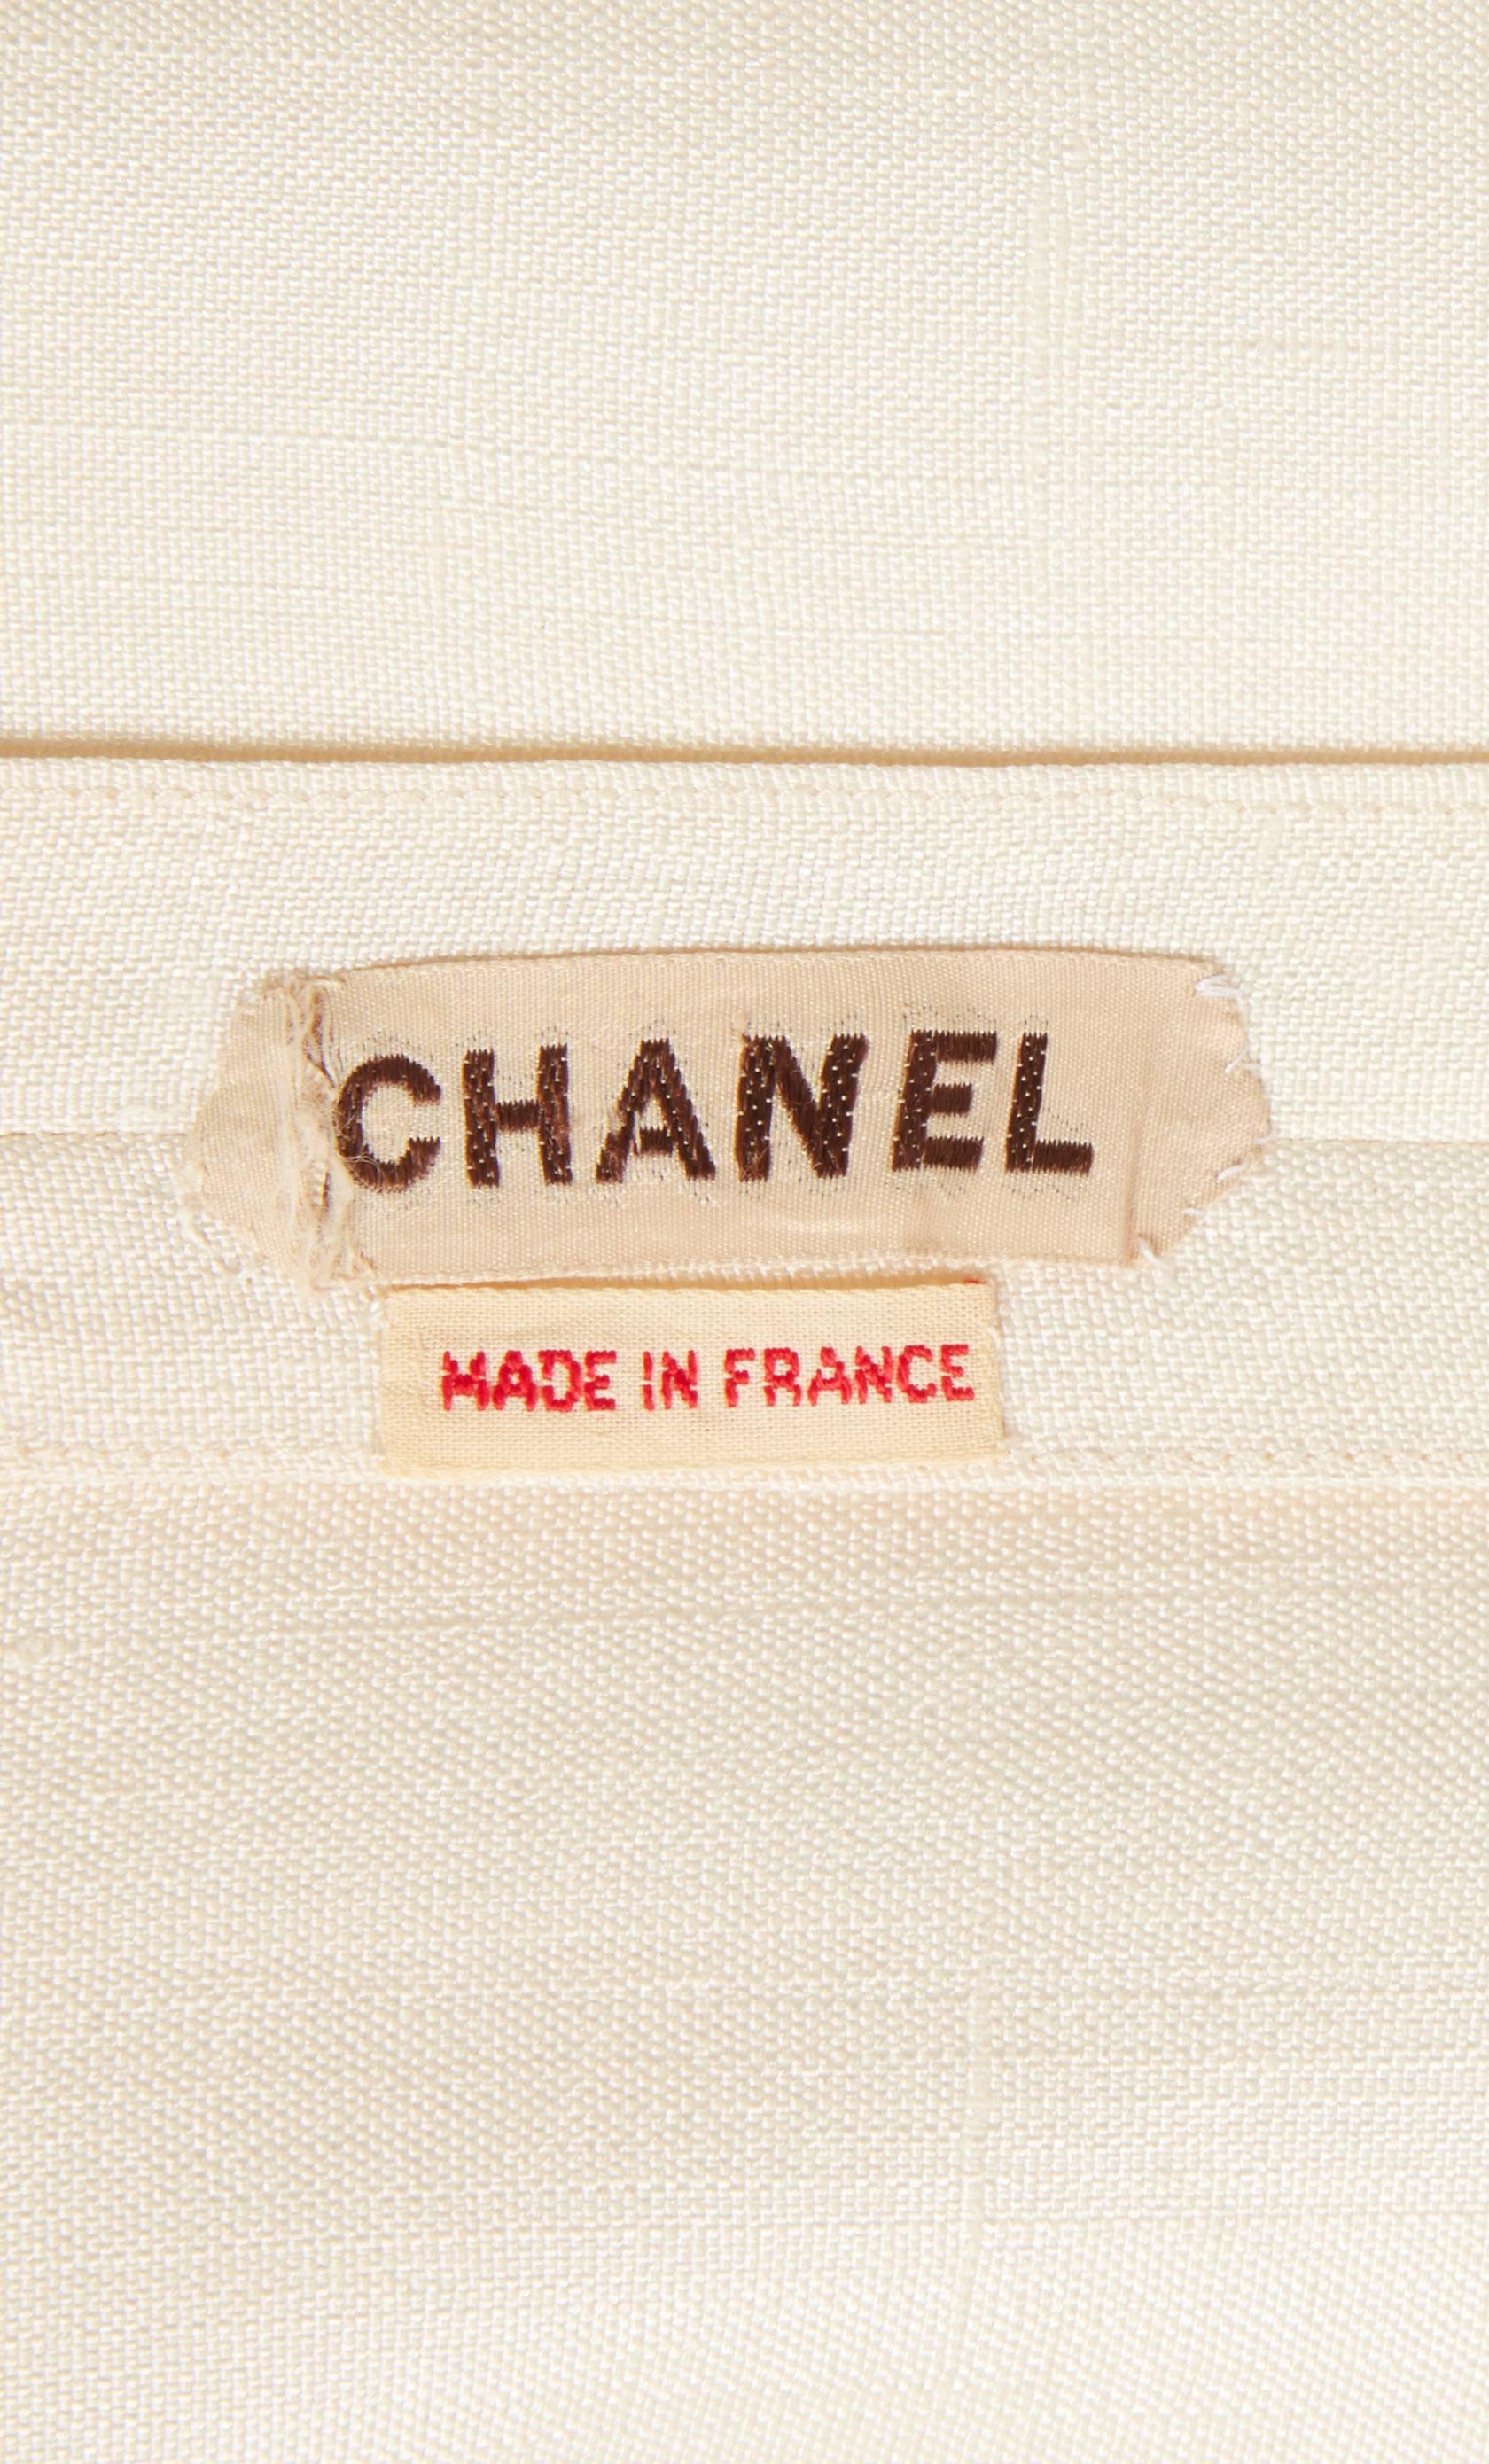 Chanel haute couture ivory suit, circa 1962 1